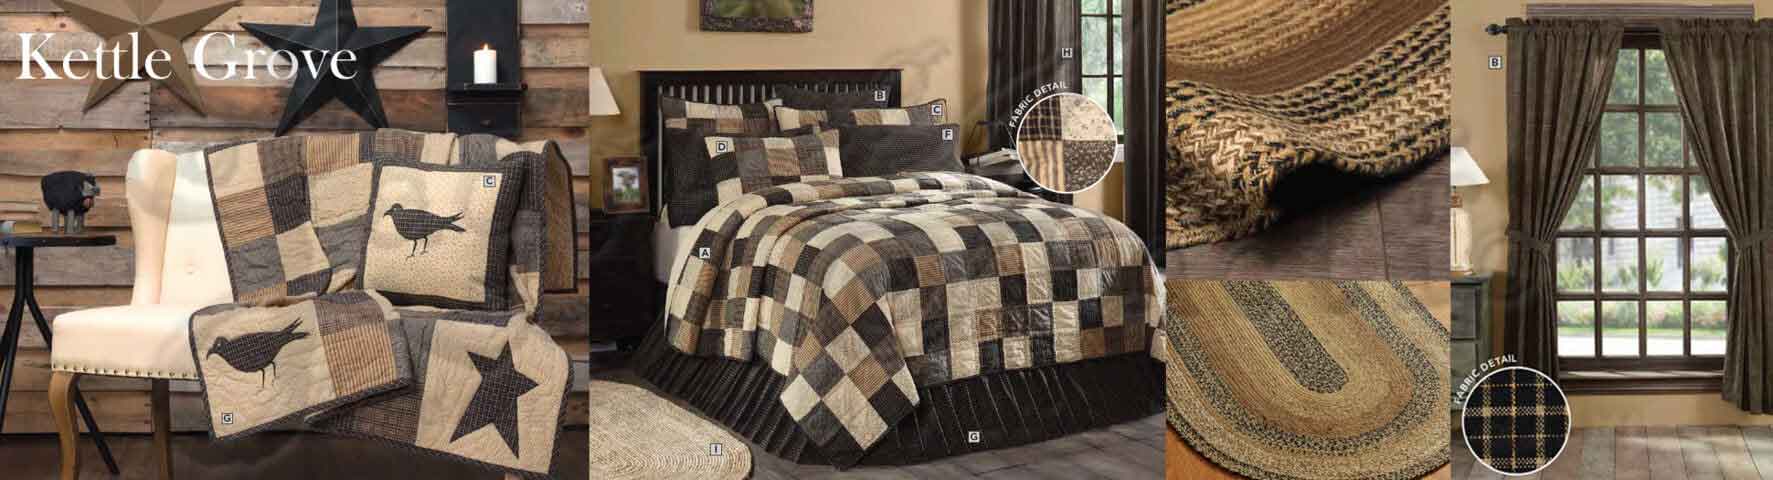  Kettle Grove Home Collection from VHC Brands 